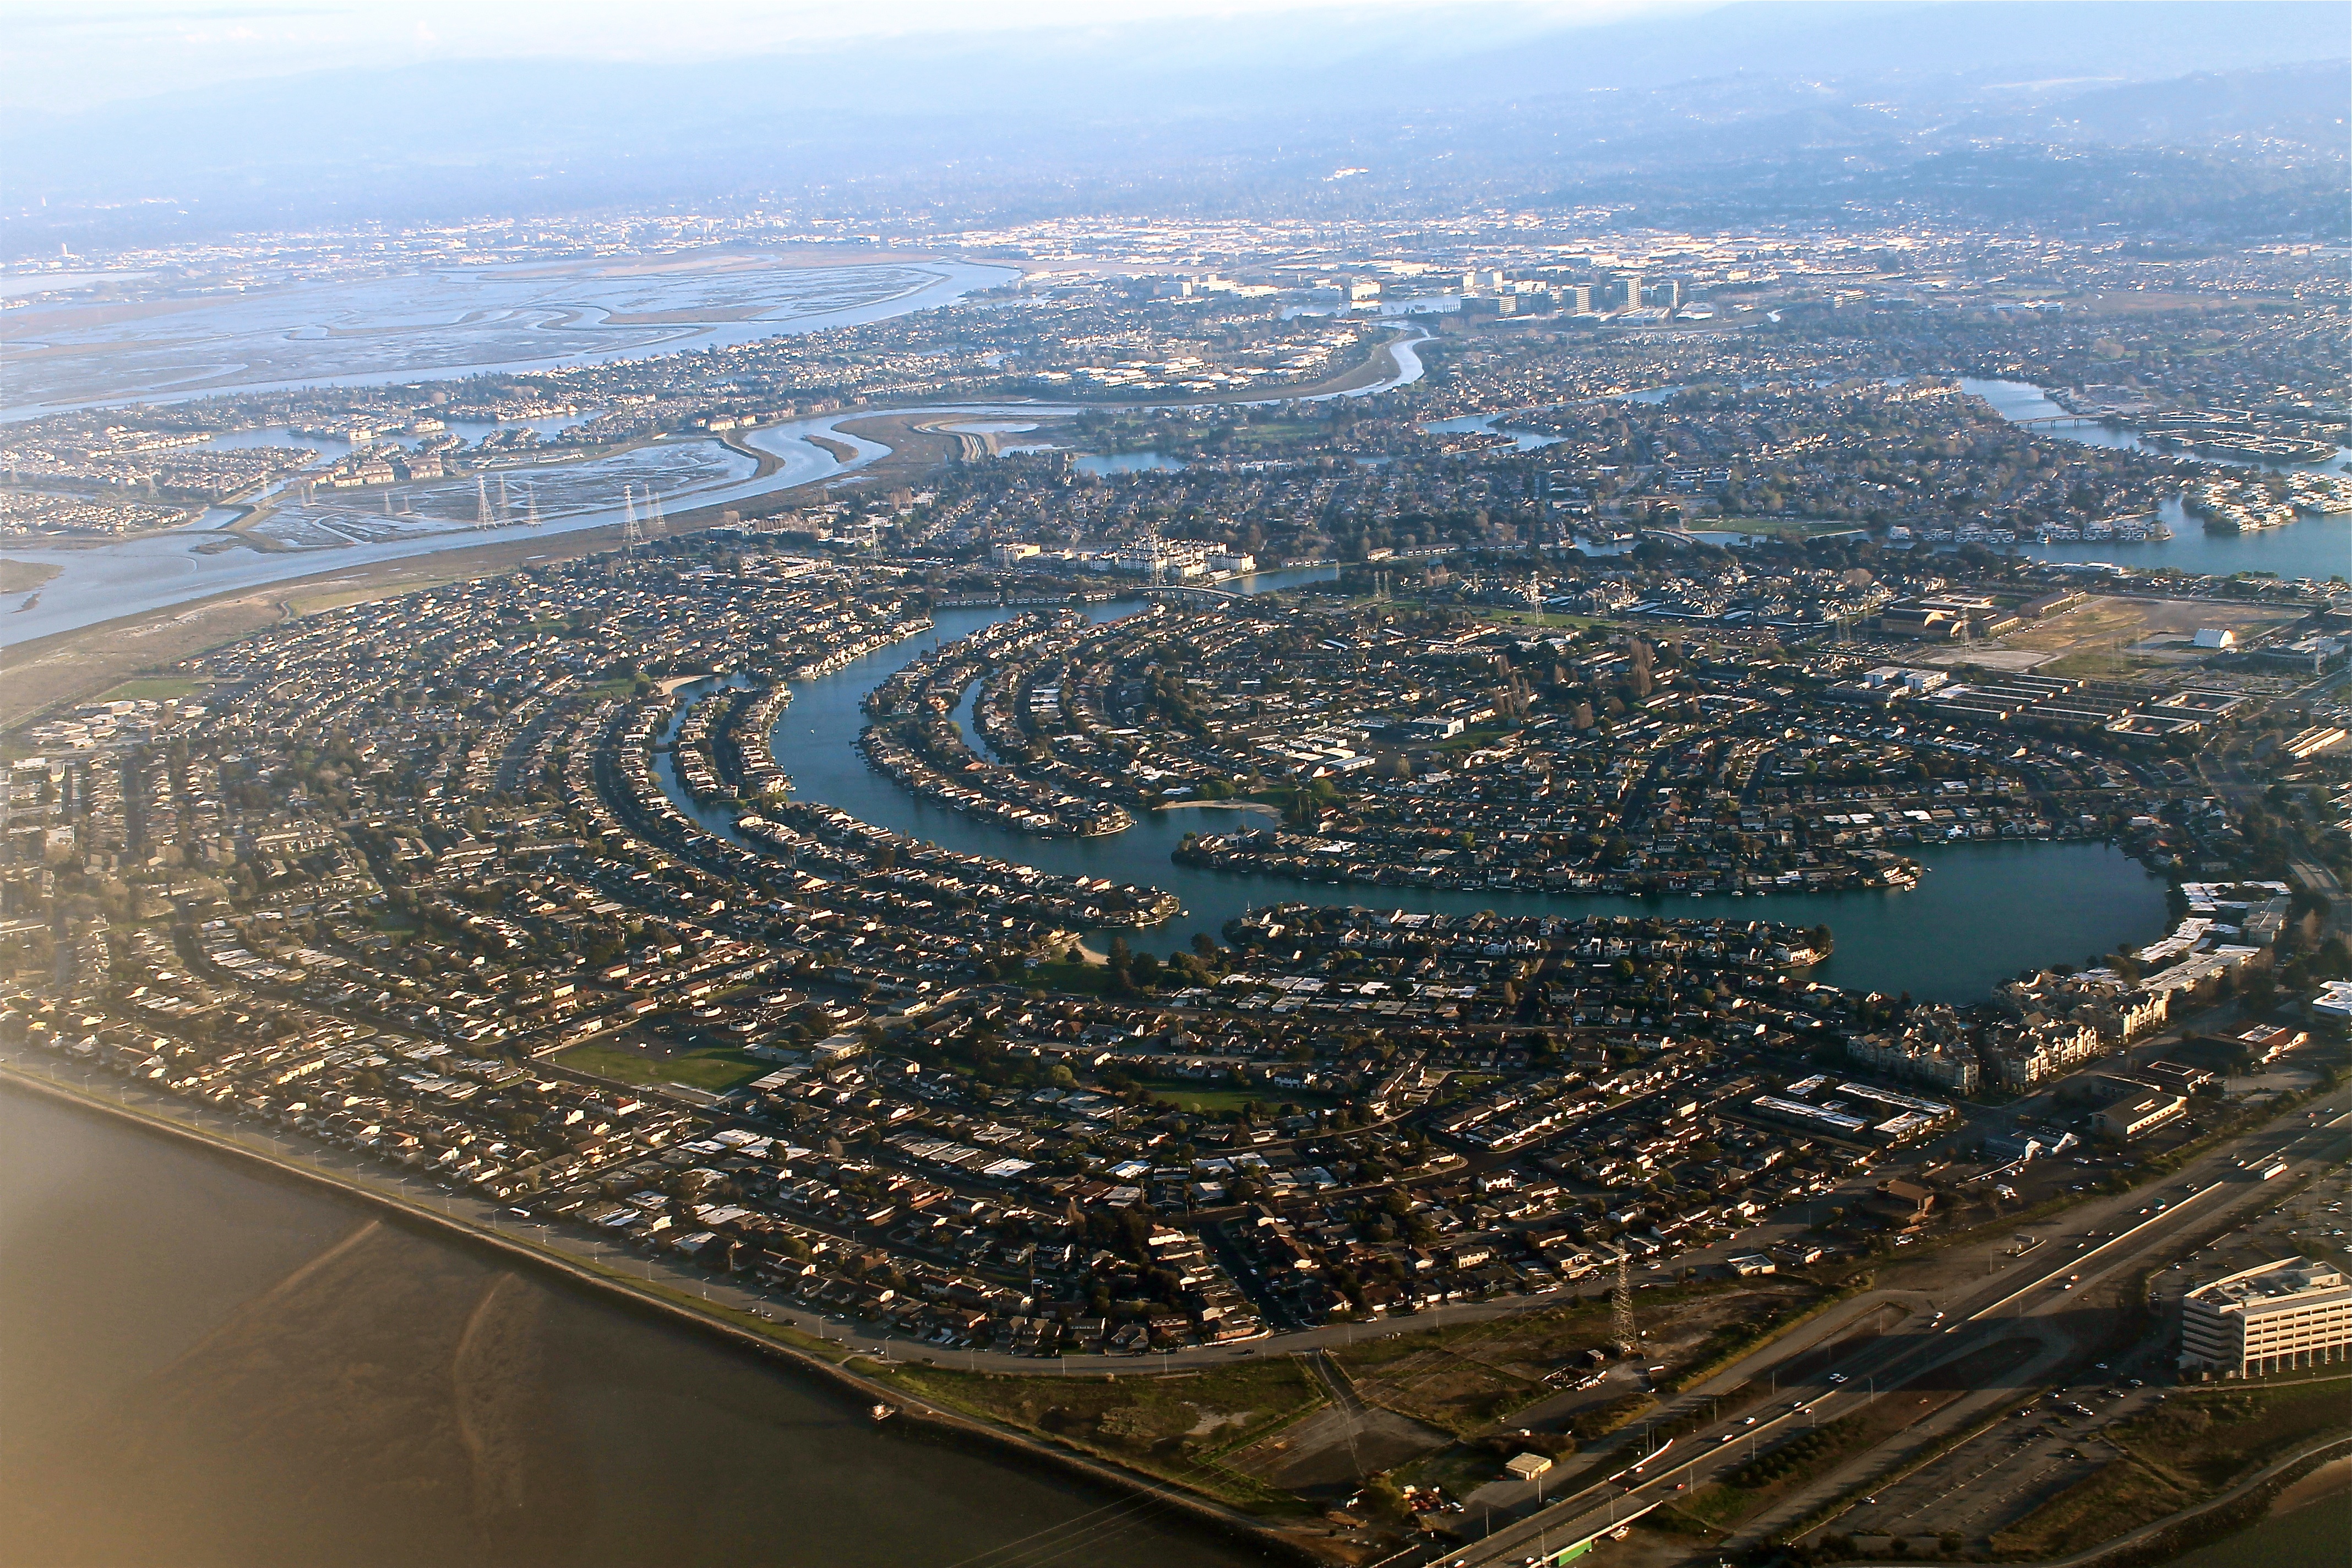 Bird's eye view of Silicon Valley landscape.